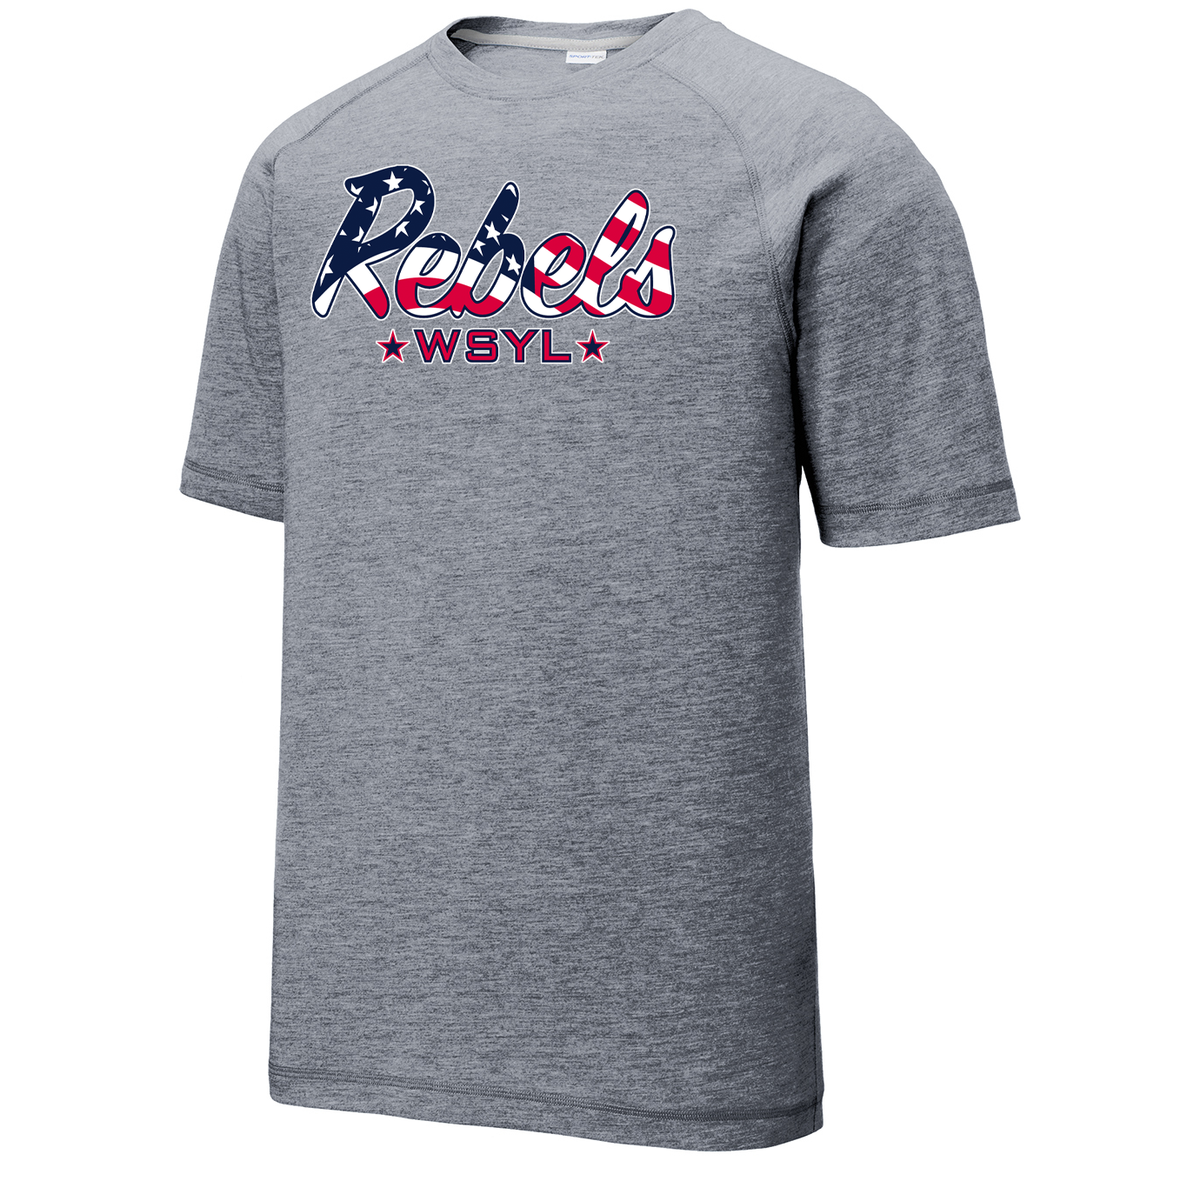 Rebels World Series Youth League Raglan CottonTouch Tee